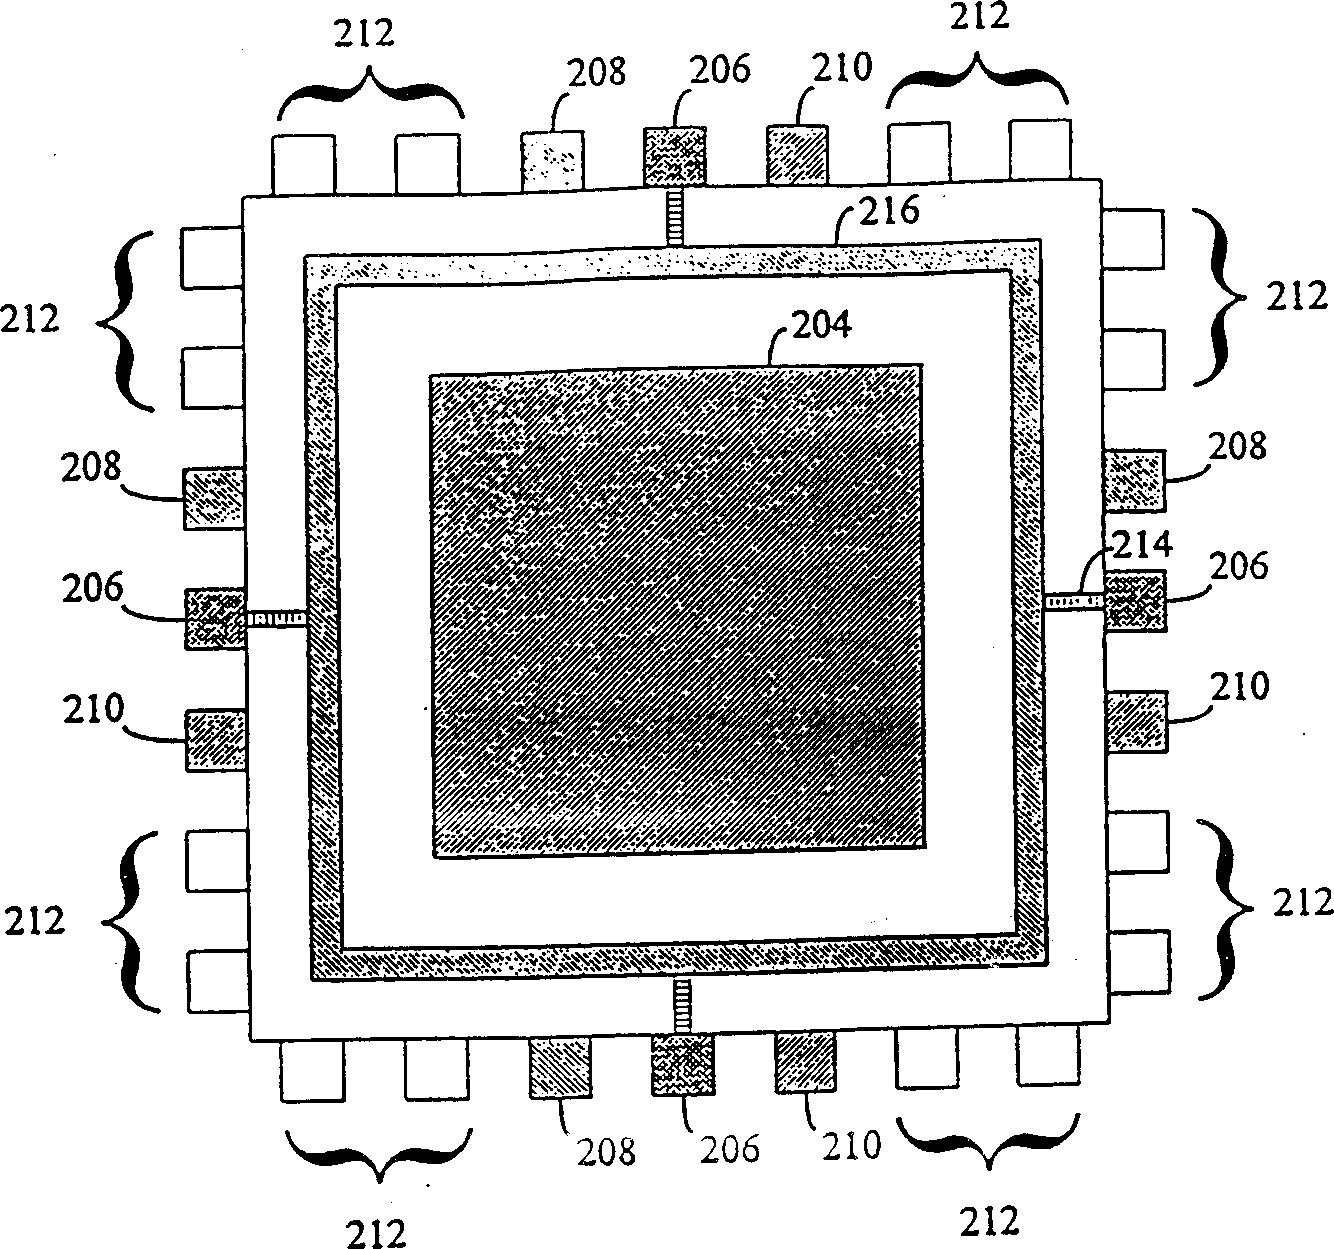 External power supply ring with multiple slender tapes for decreasing voltage drop of integrated circuit